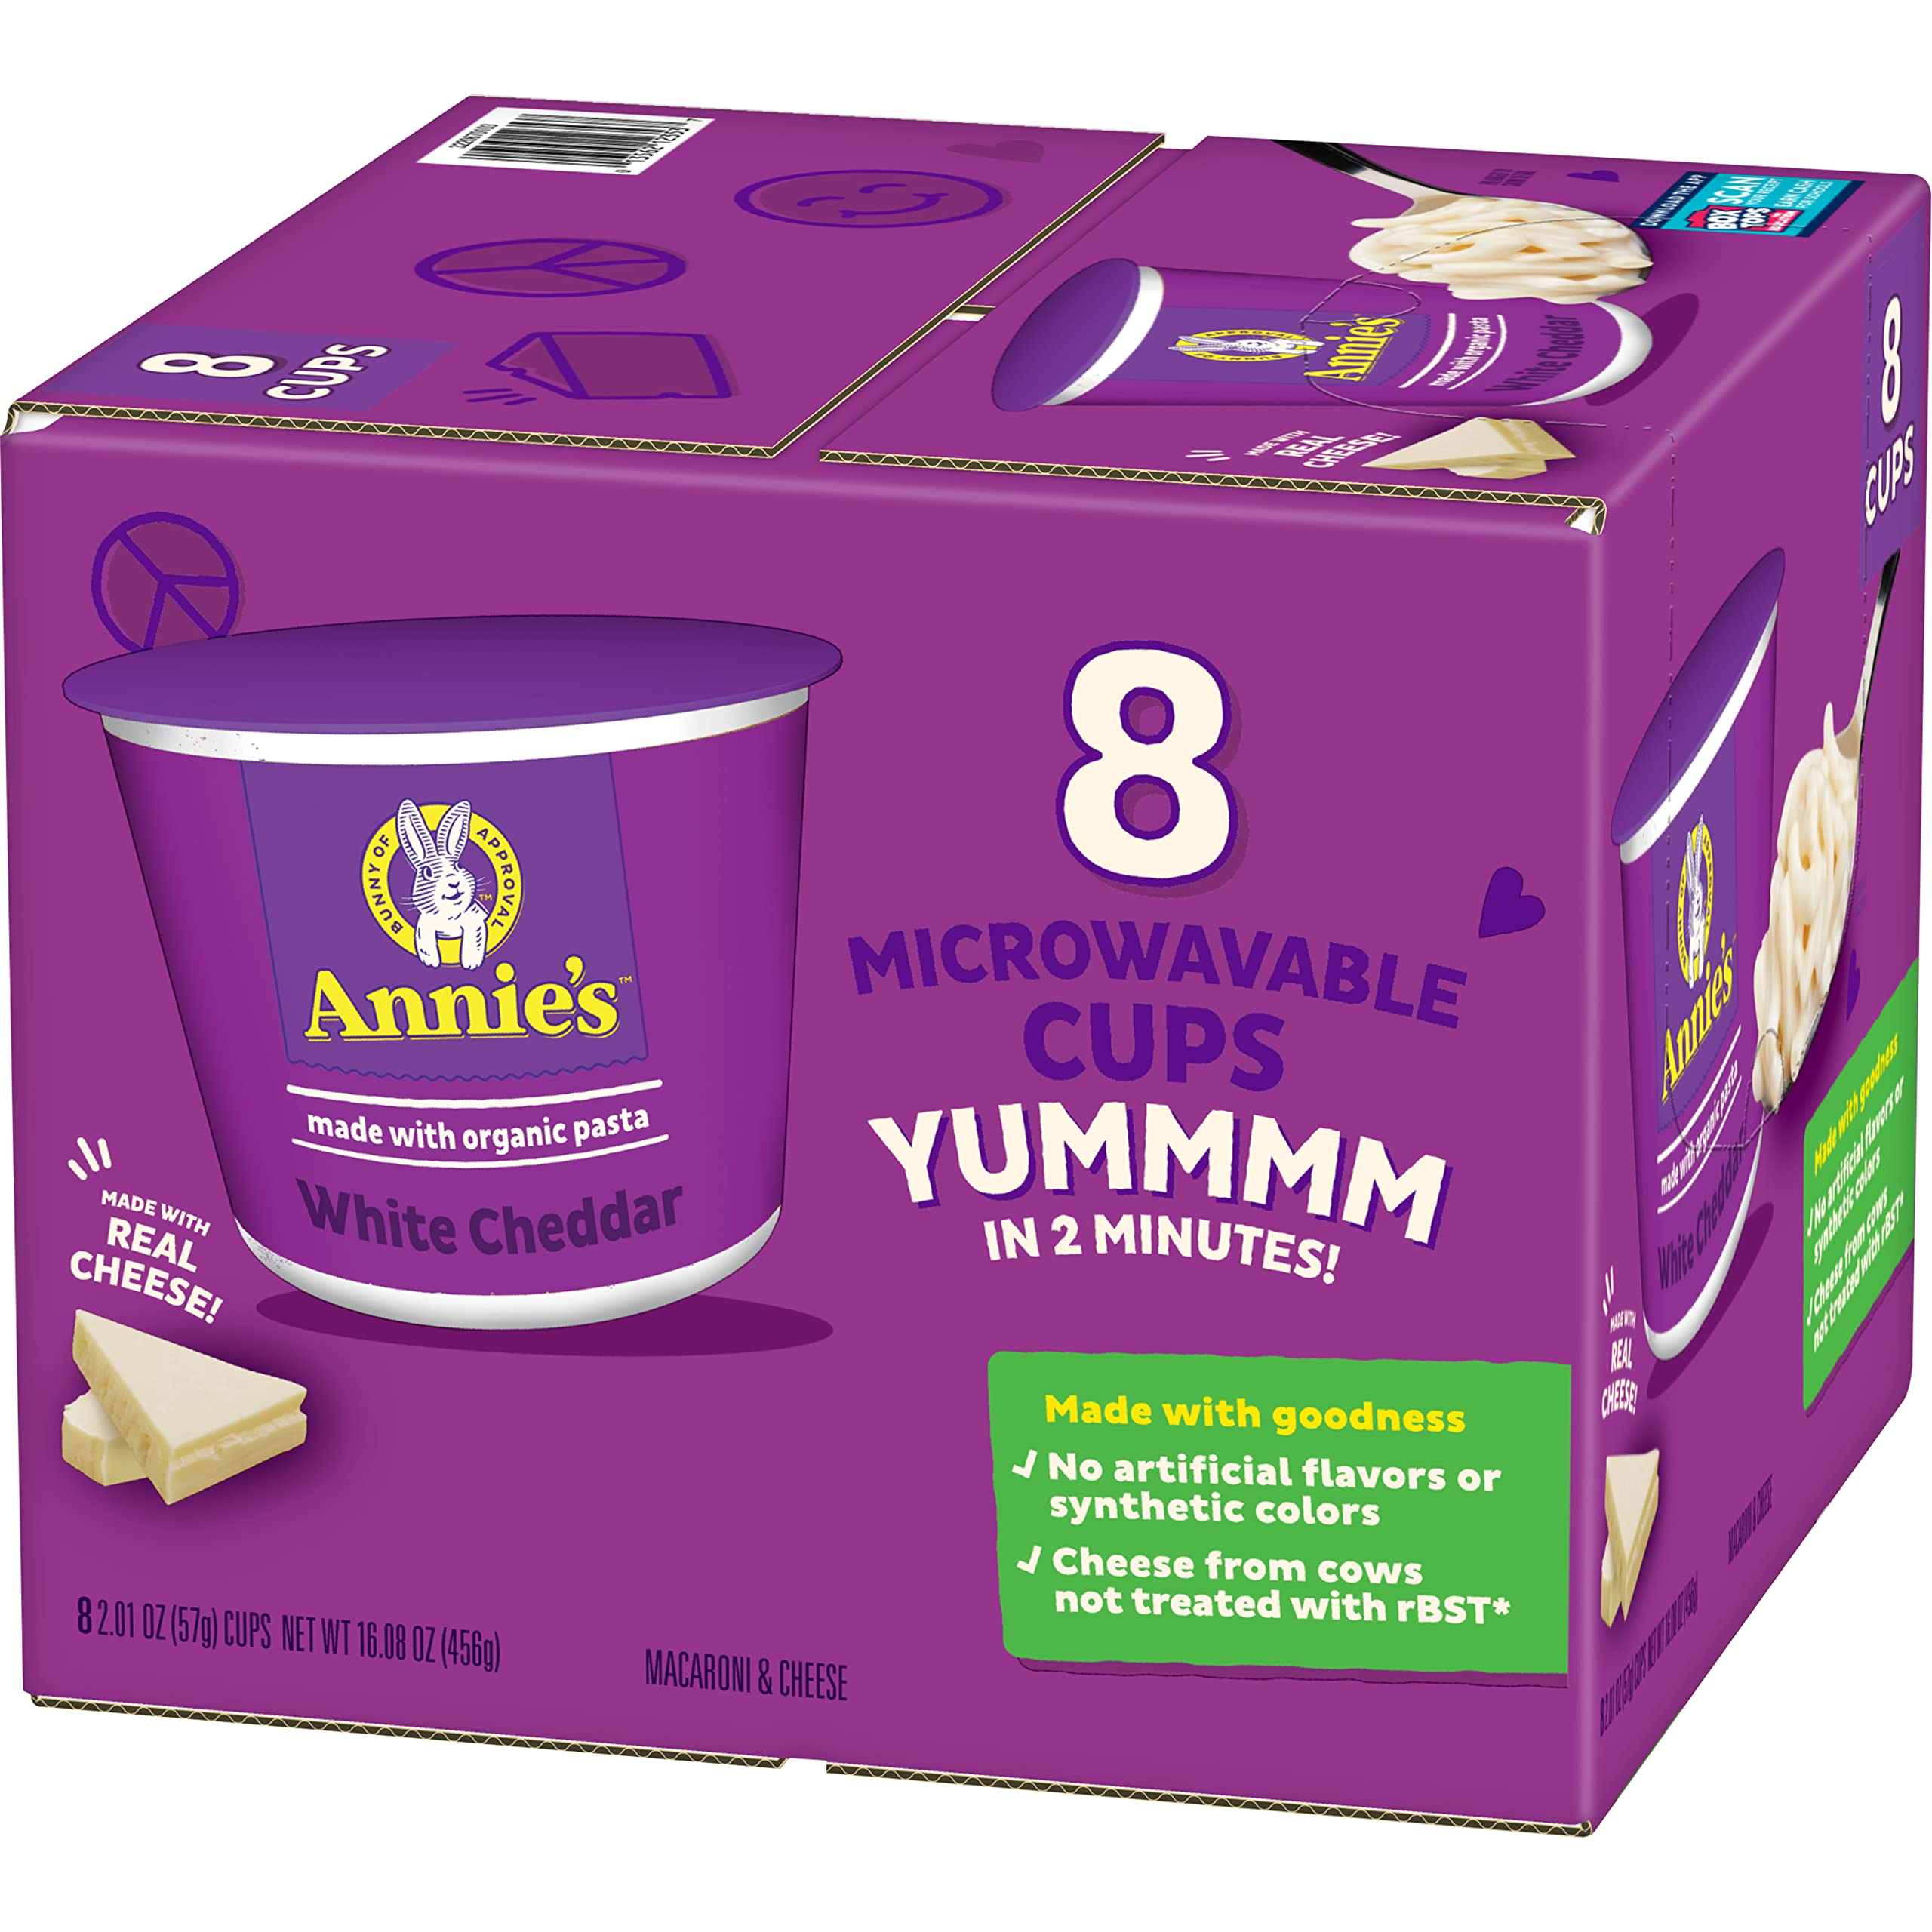 8-Count 2.01-Oz Annie's White Cheddar Mac & Cheese Cups $7.37 (.92c Ea) w/ S&S + Free Shipping w/ Prime or on orders over $35